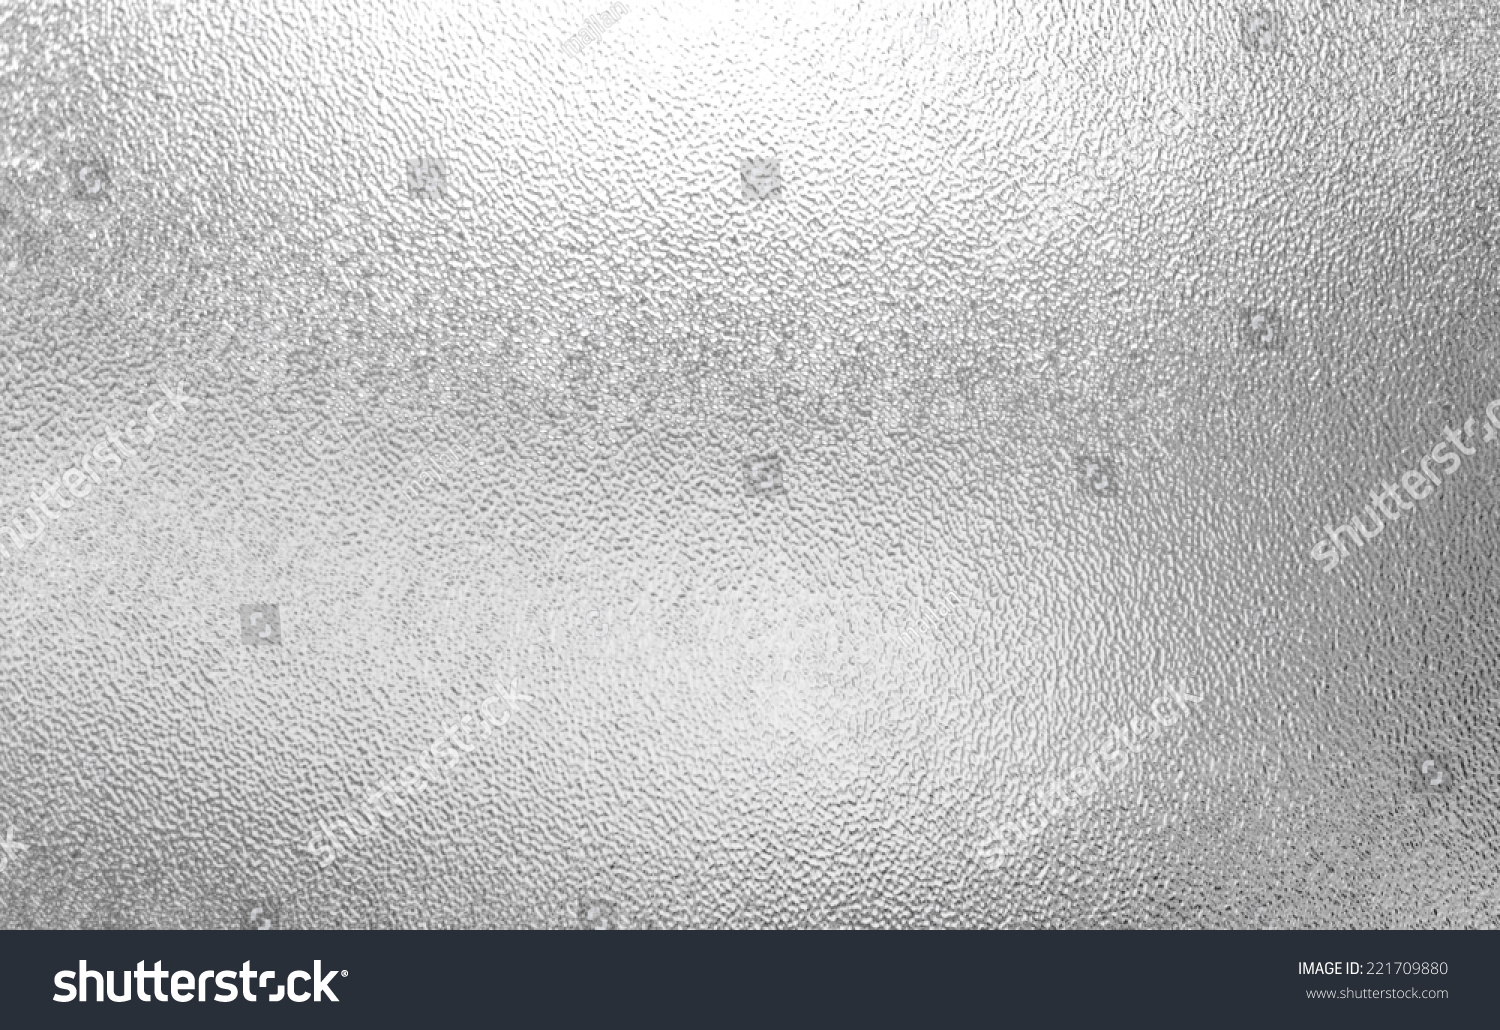 Frosted Glass. #221709880